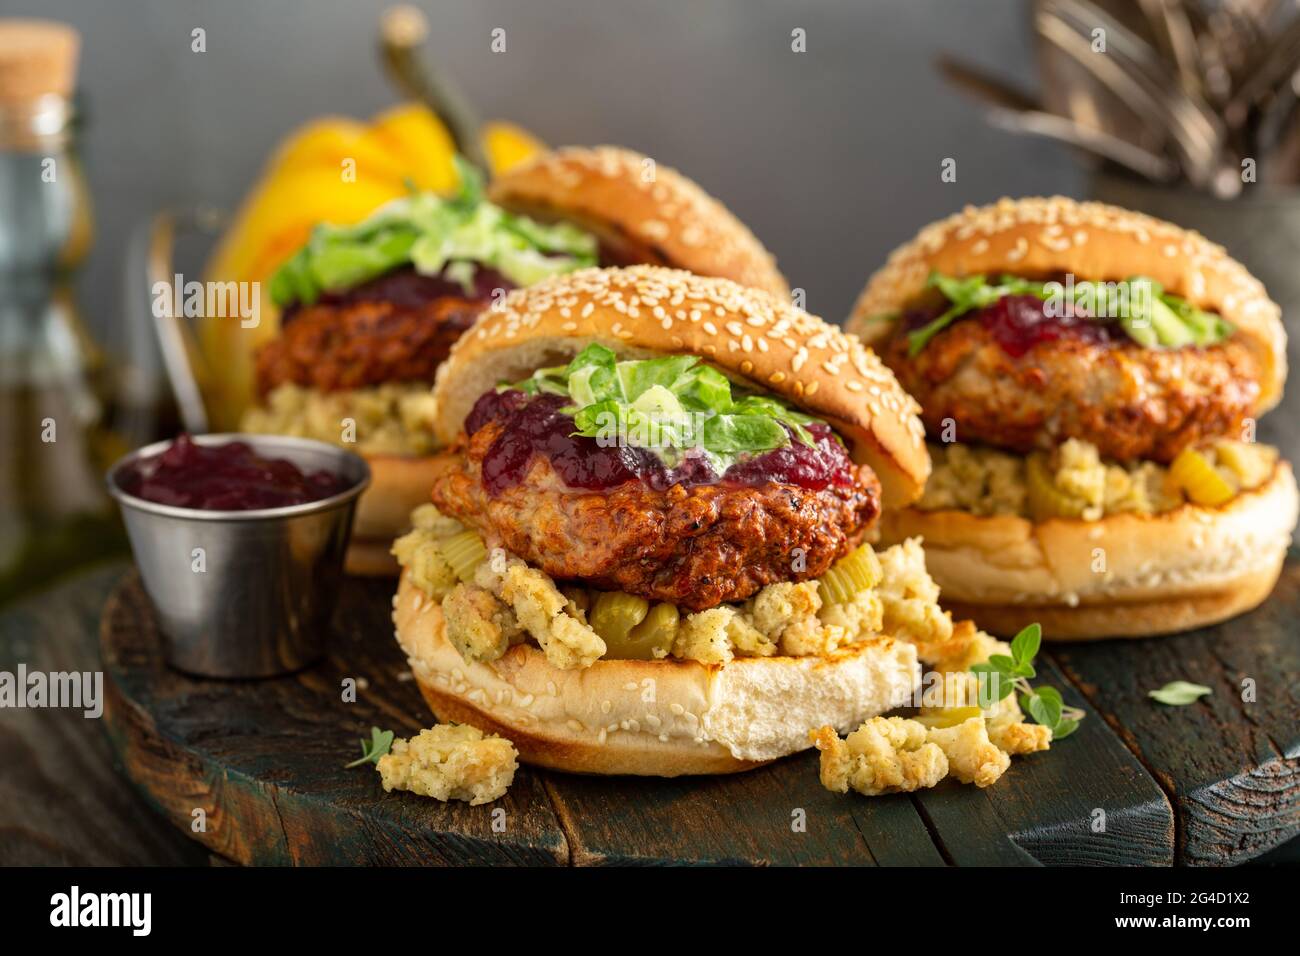 Turkey Burgers With Stuffing And Cranberry Sauce Stock Photo Alamy